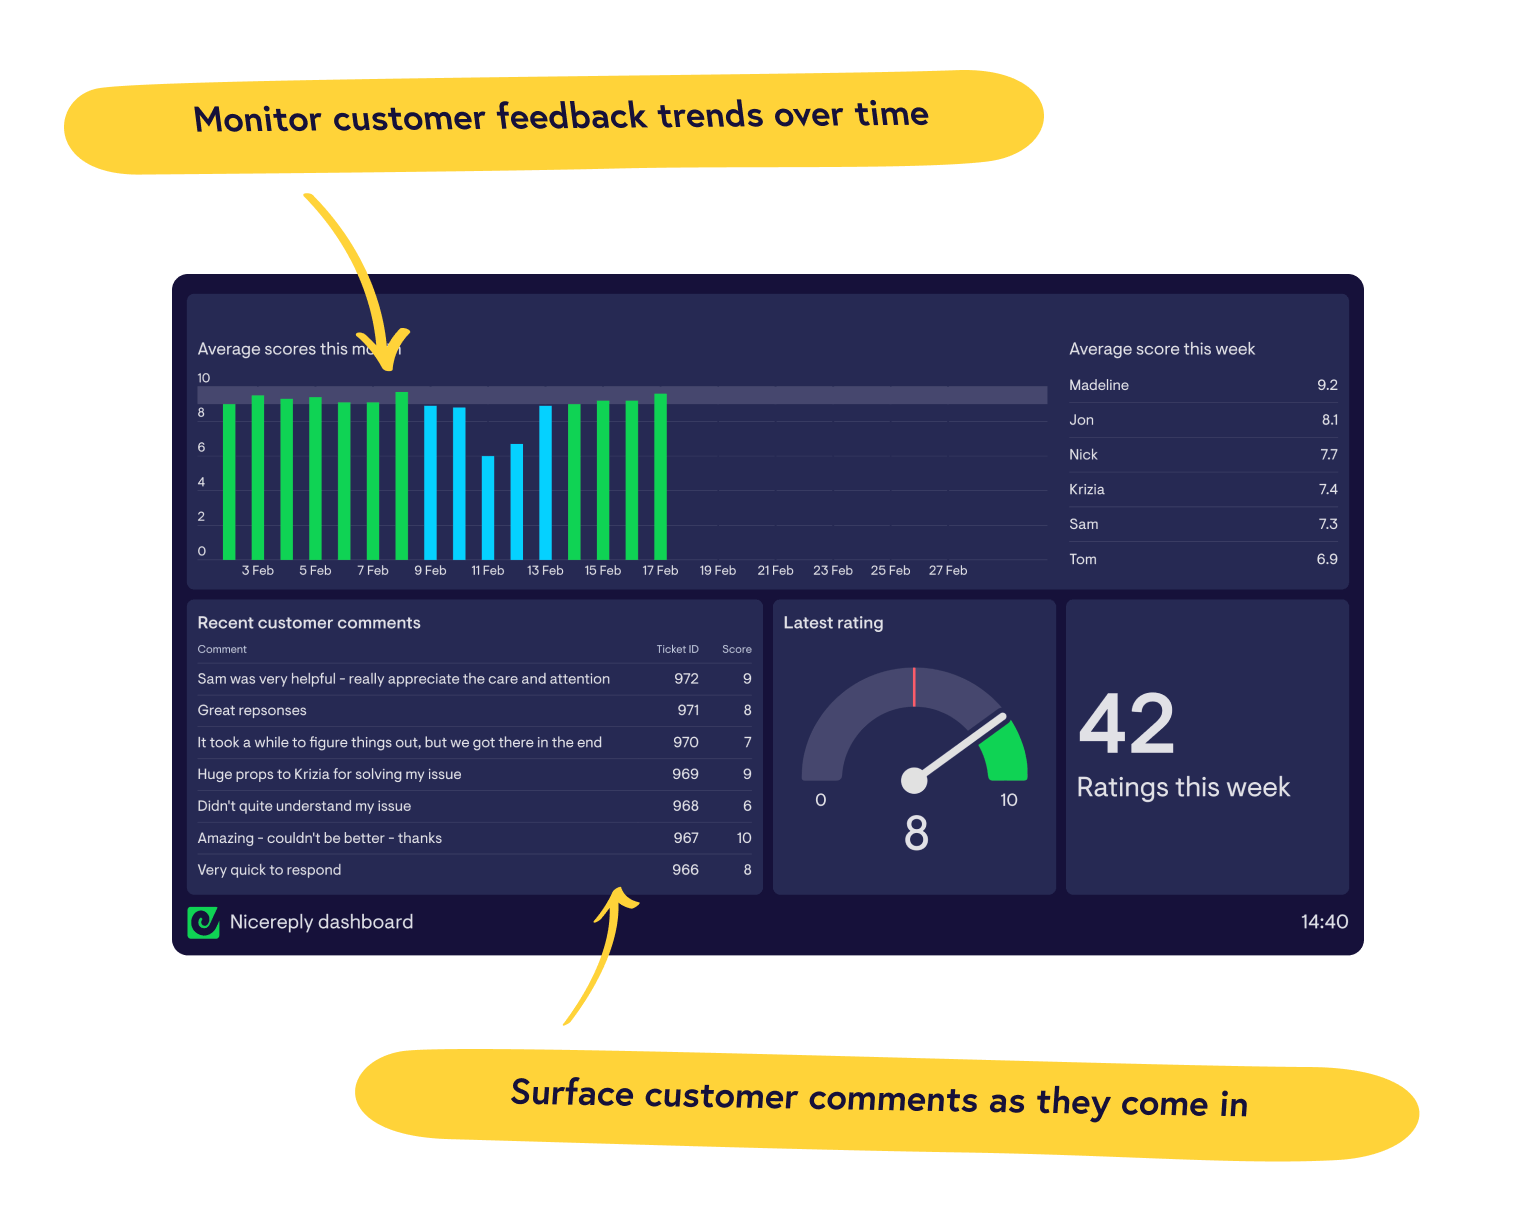 Real-time Nicereply dashboards from Geckoboard